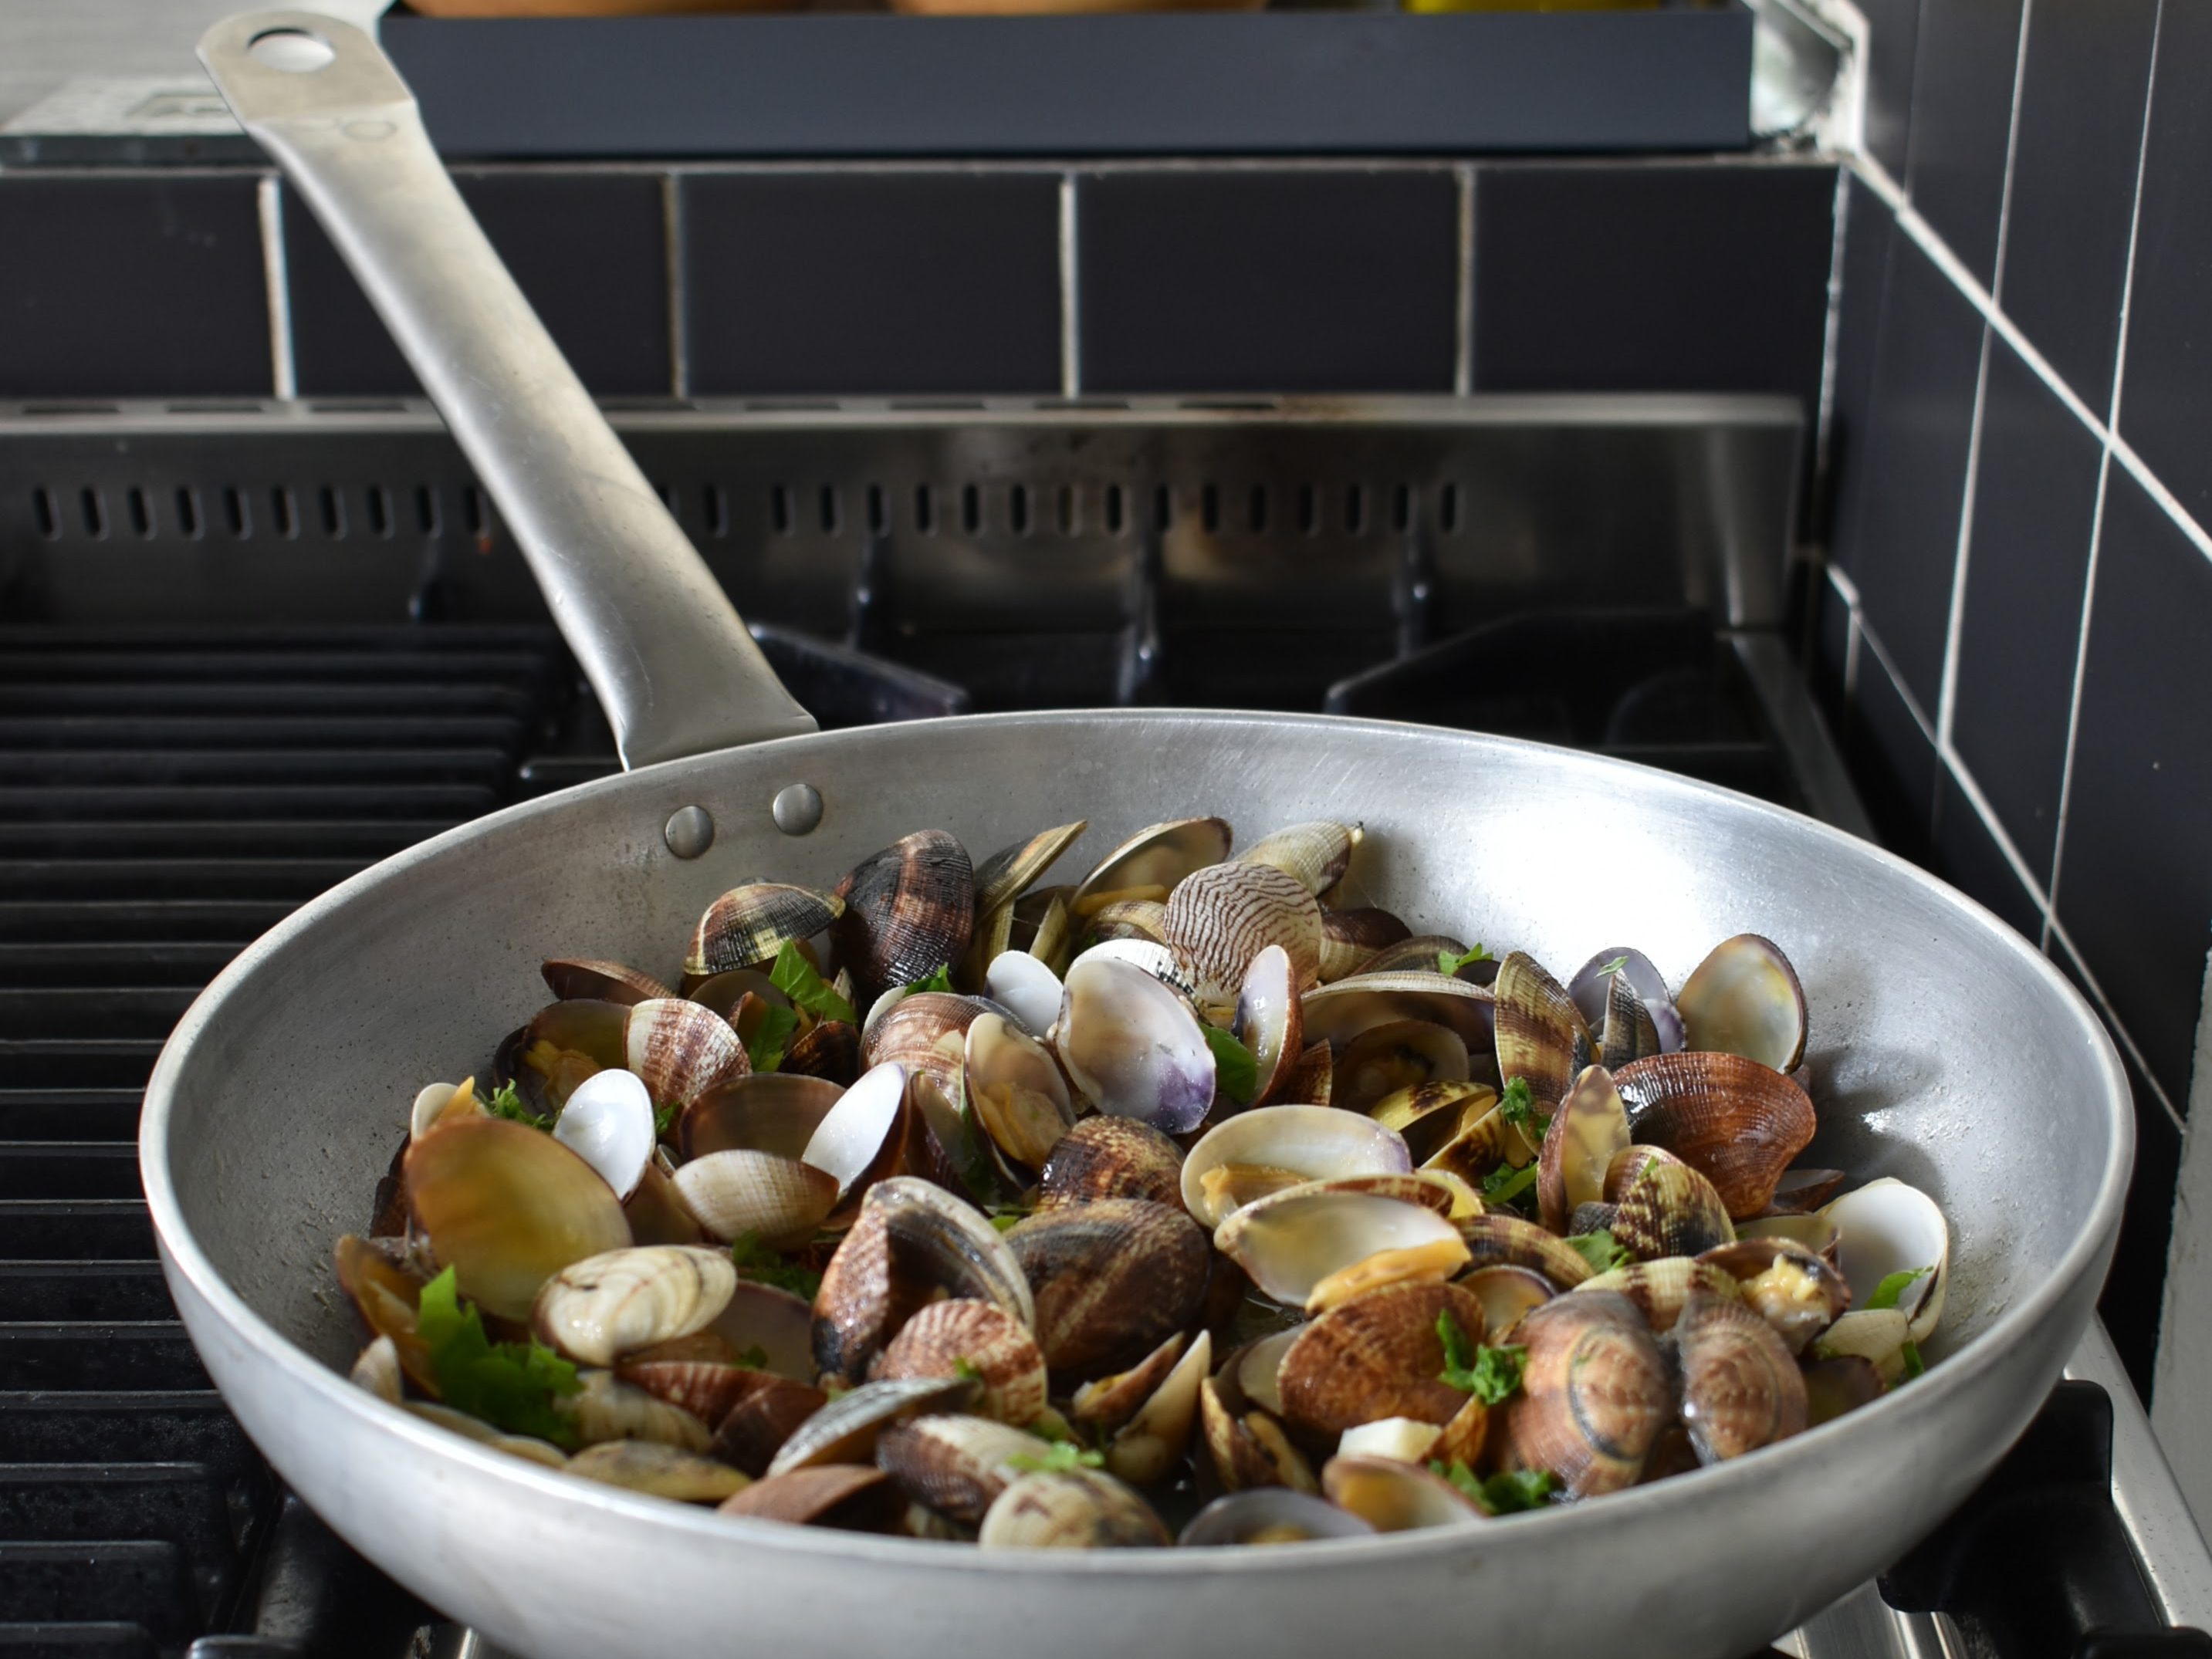 Traditional Spaghetti with Vongole - Spaghetti with Clams